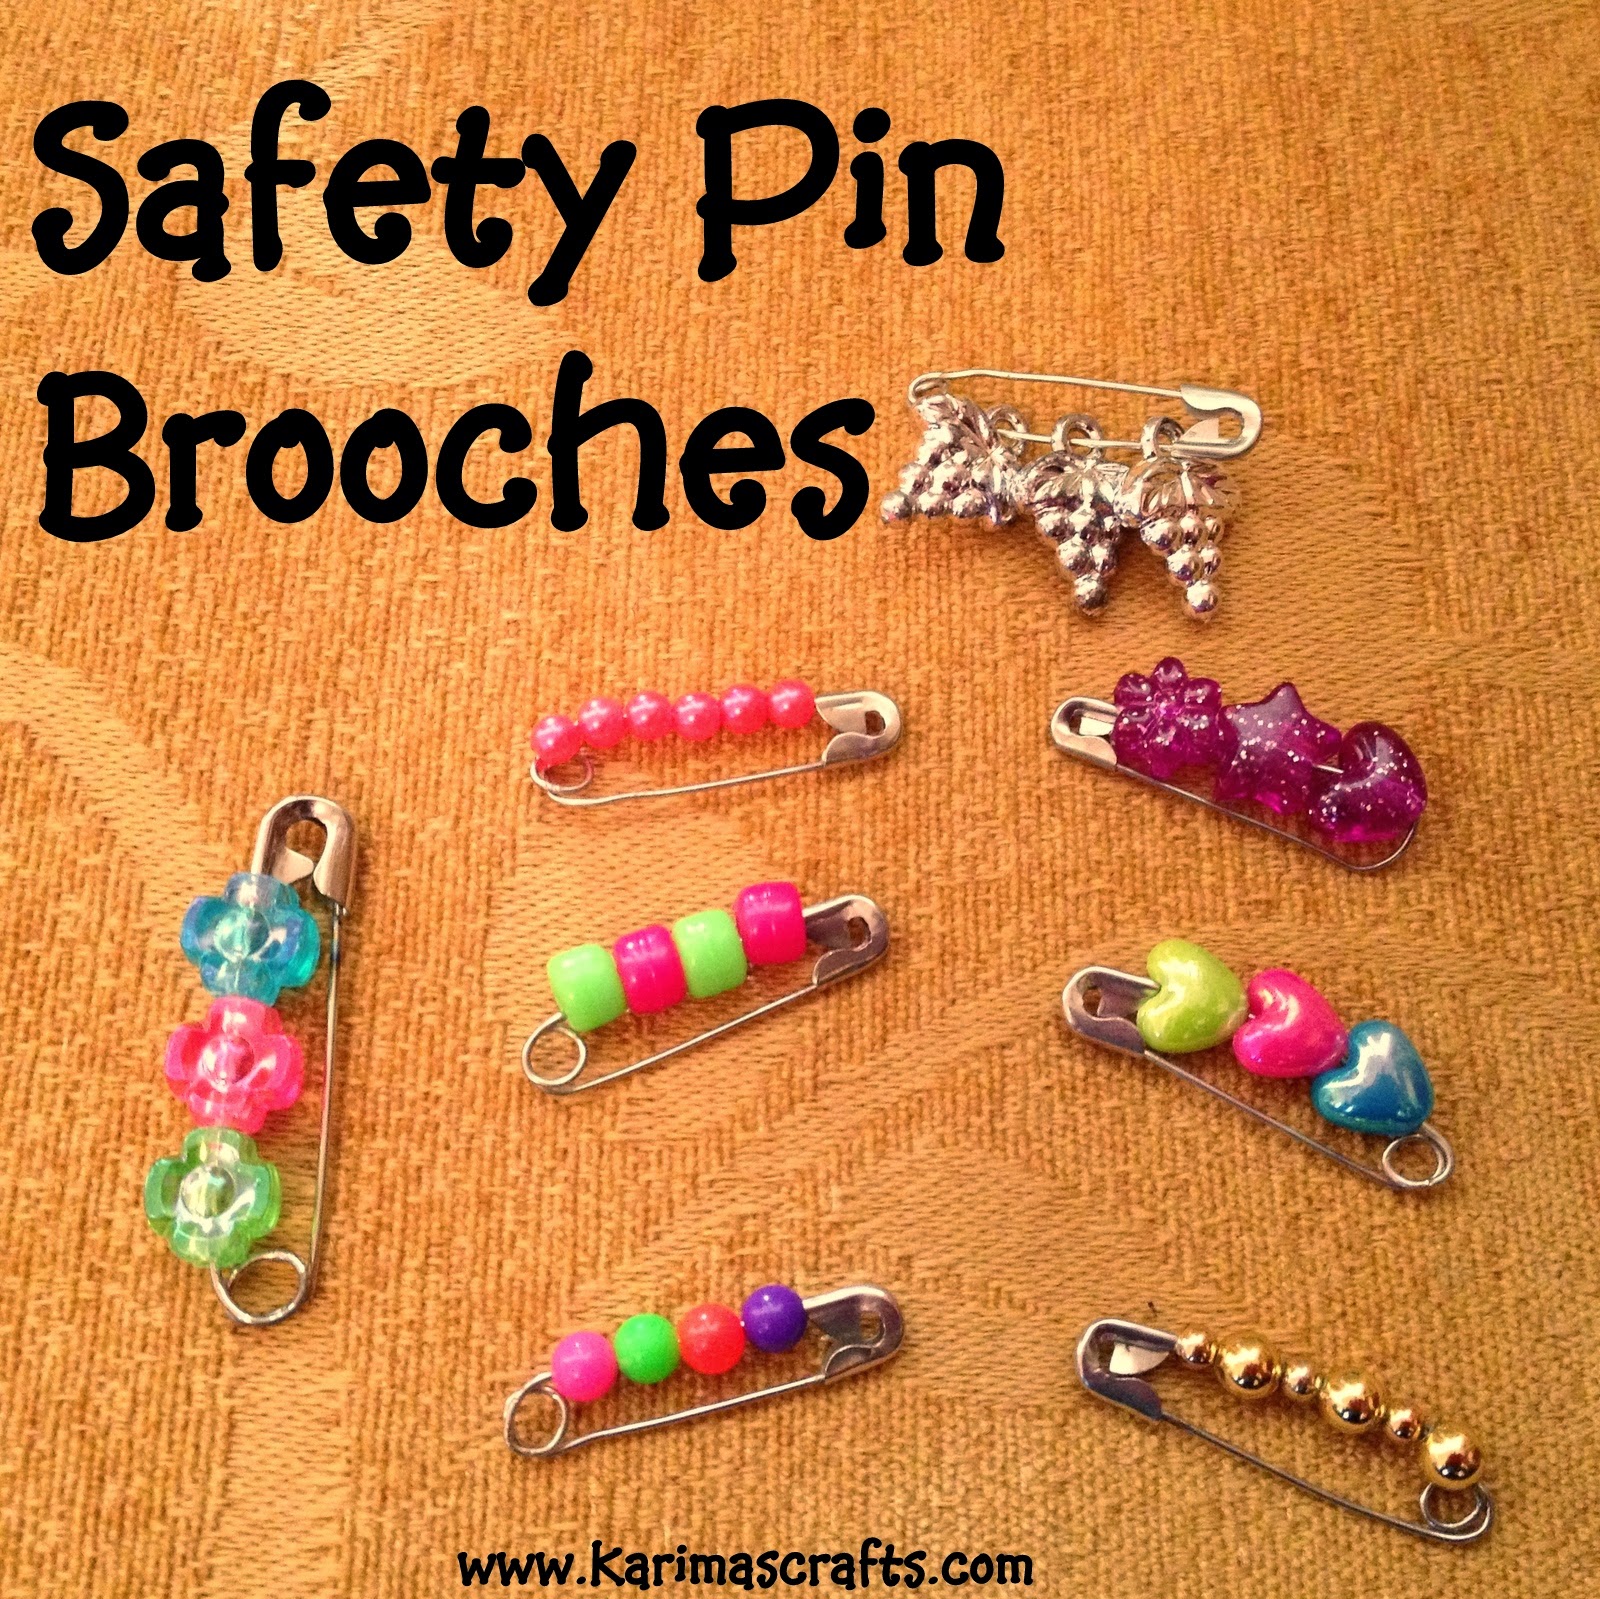 Karima's Crafts: Safety Pin Brooches Tutorial